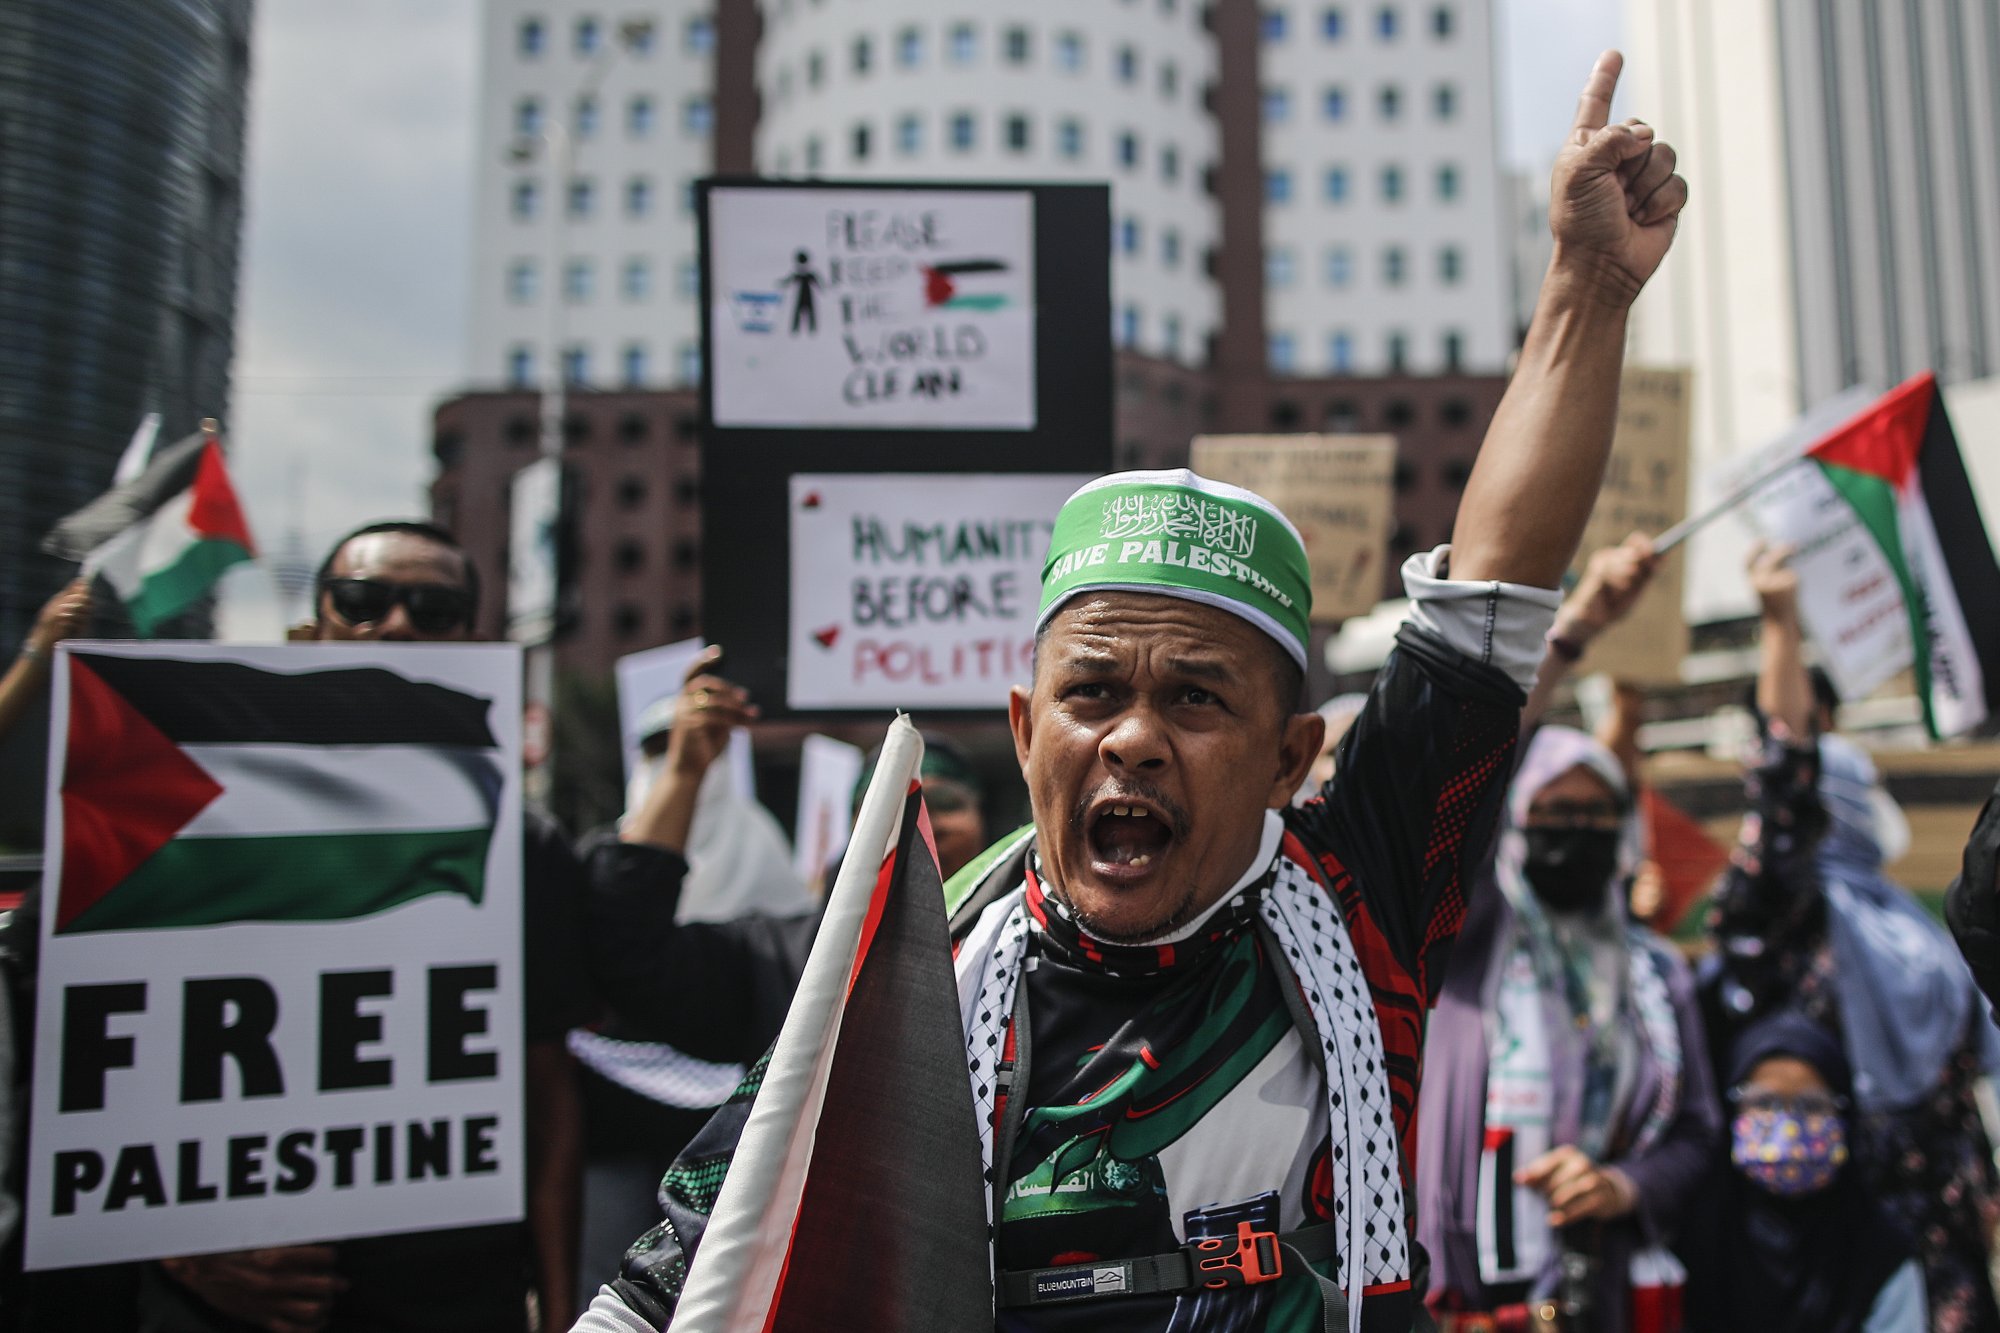 A man reacts during a “Free Palestine” rally near the US embassy in Kuala Lumpur, Malaysia, in December 2023. Photo: EPA-EFE